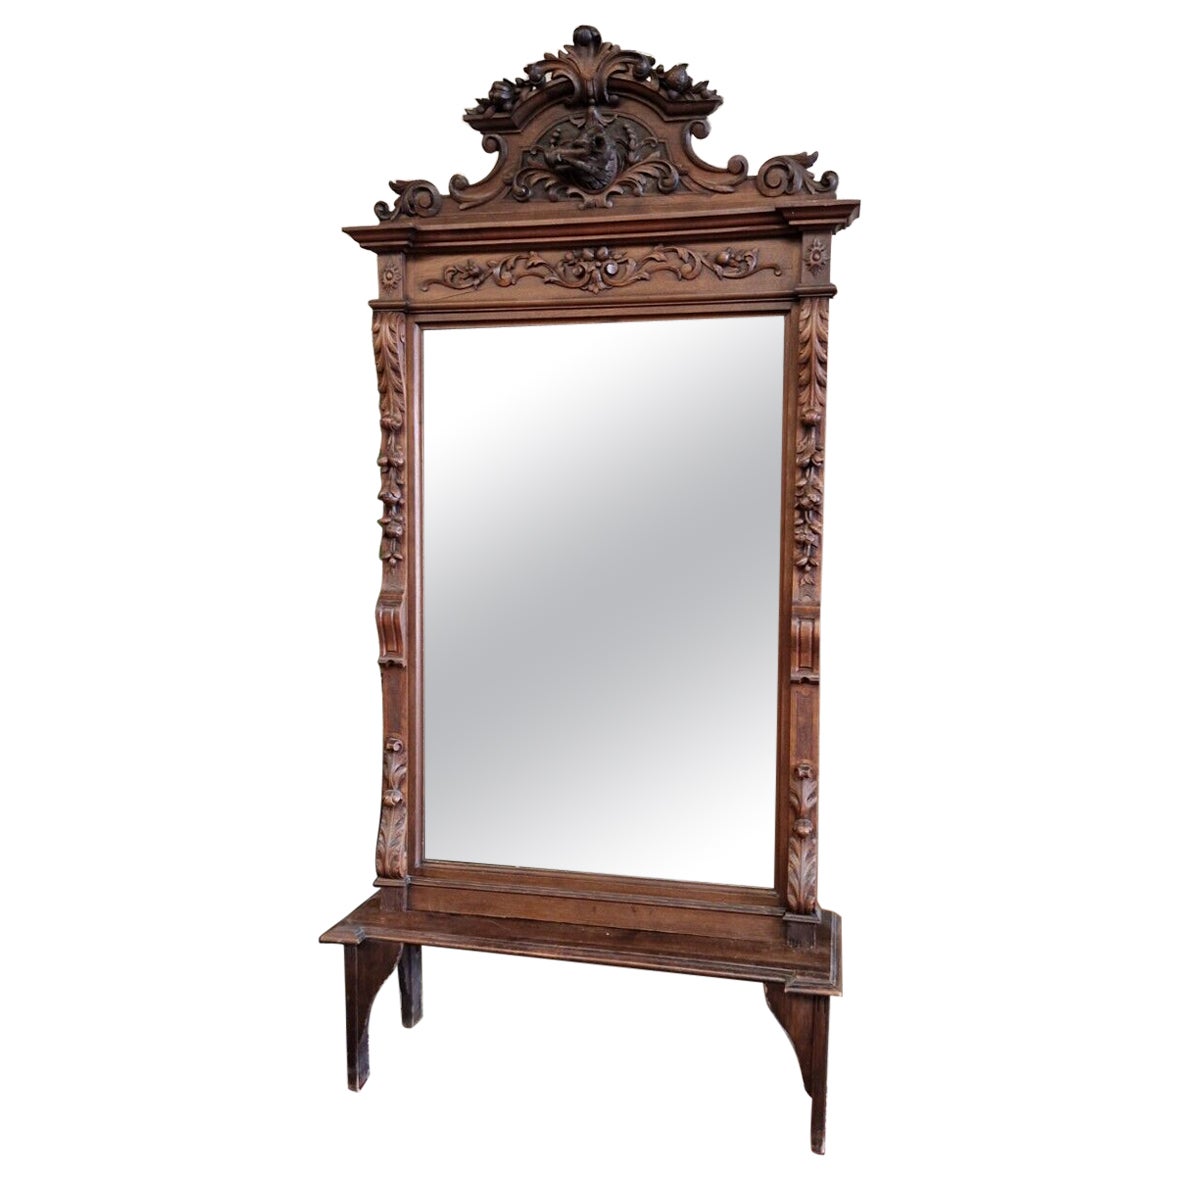 19th Century French Hunting Lodge Mirror Heavily Carved